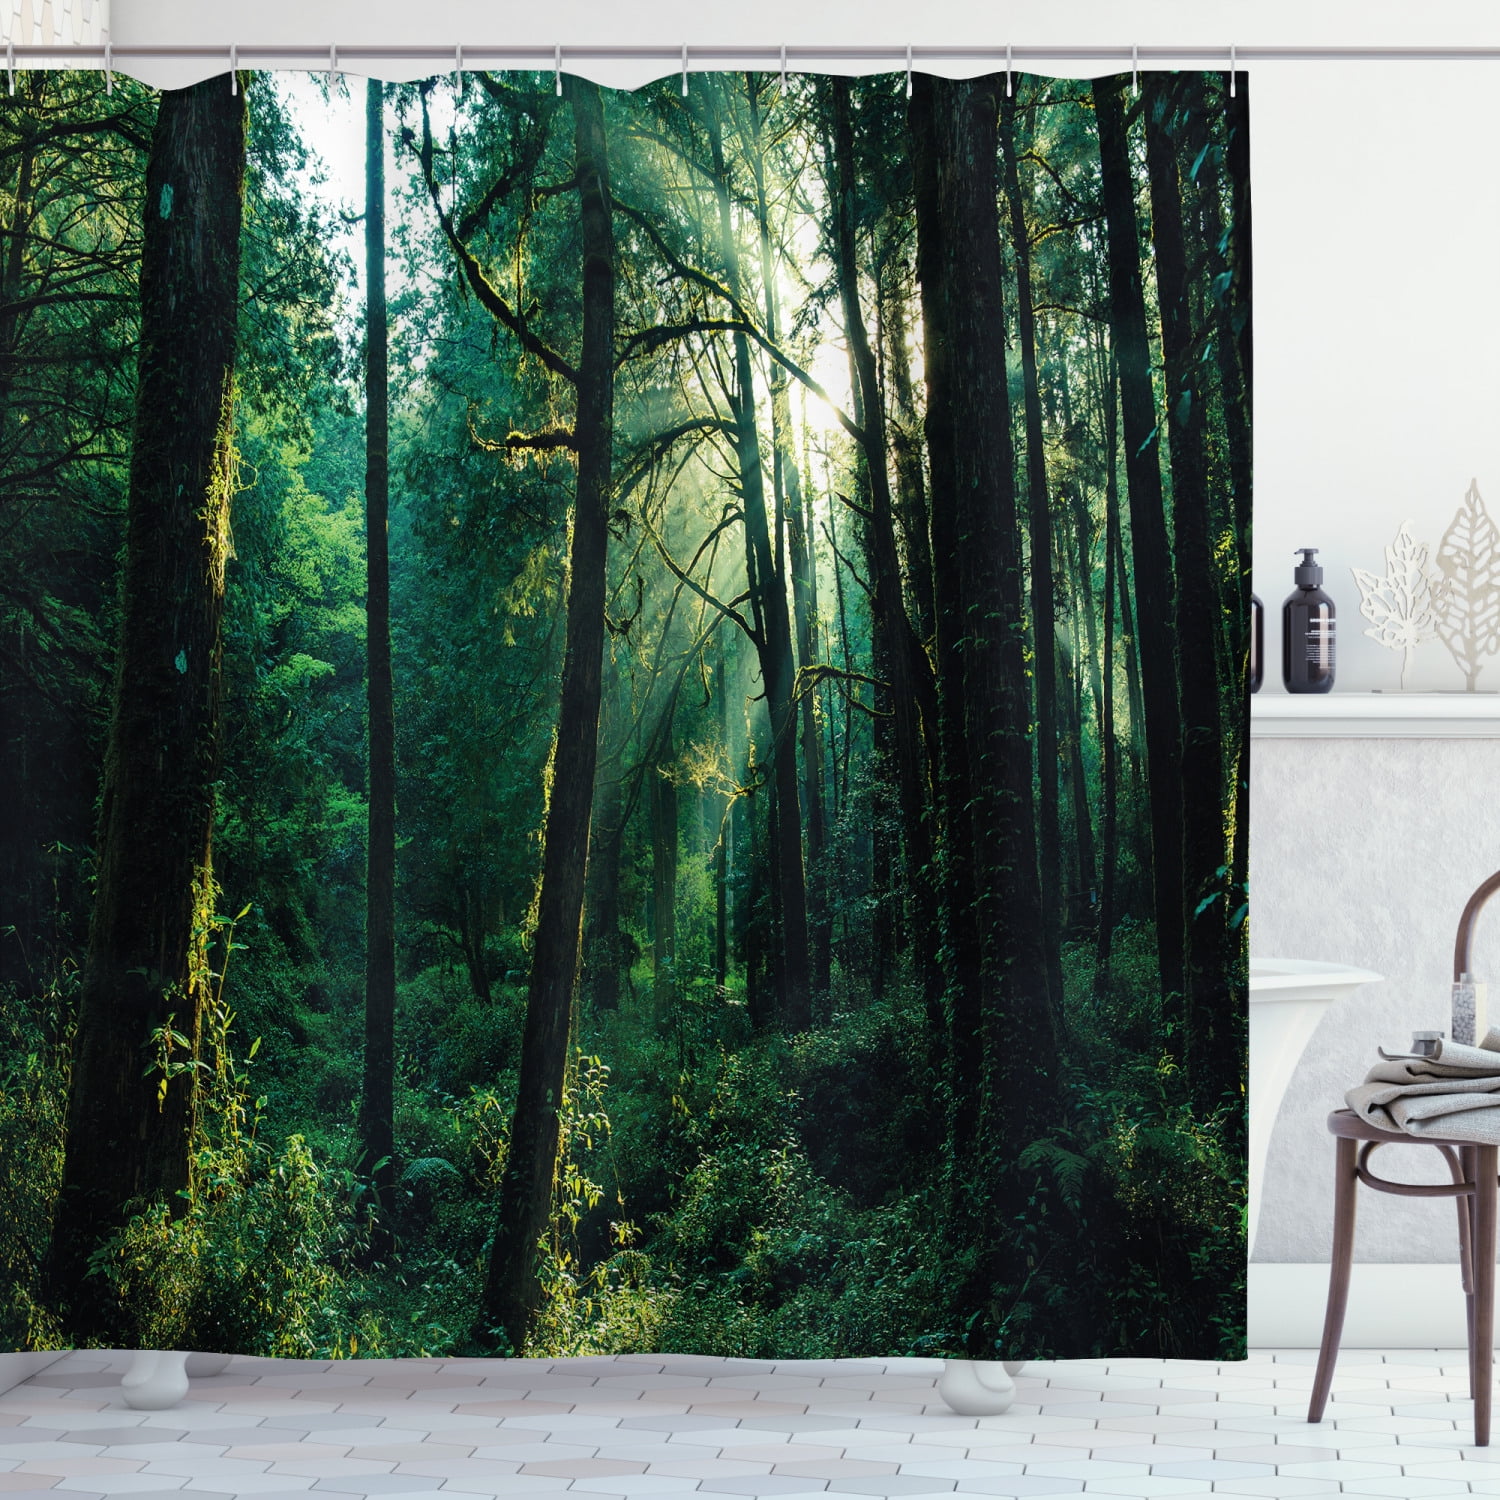 Spring Green Forest Scenery Bathroom Waterproof Fabric Shower Curtain Set 180cm 